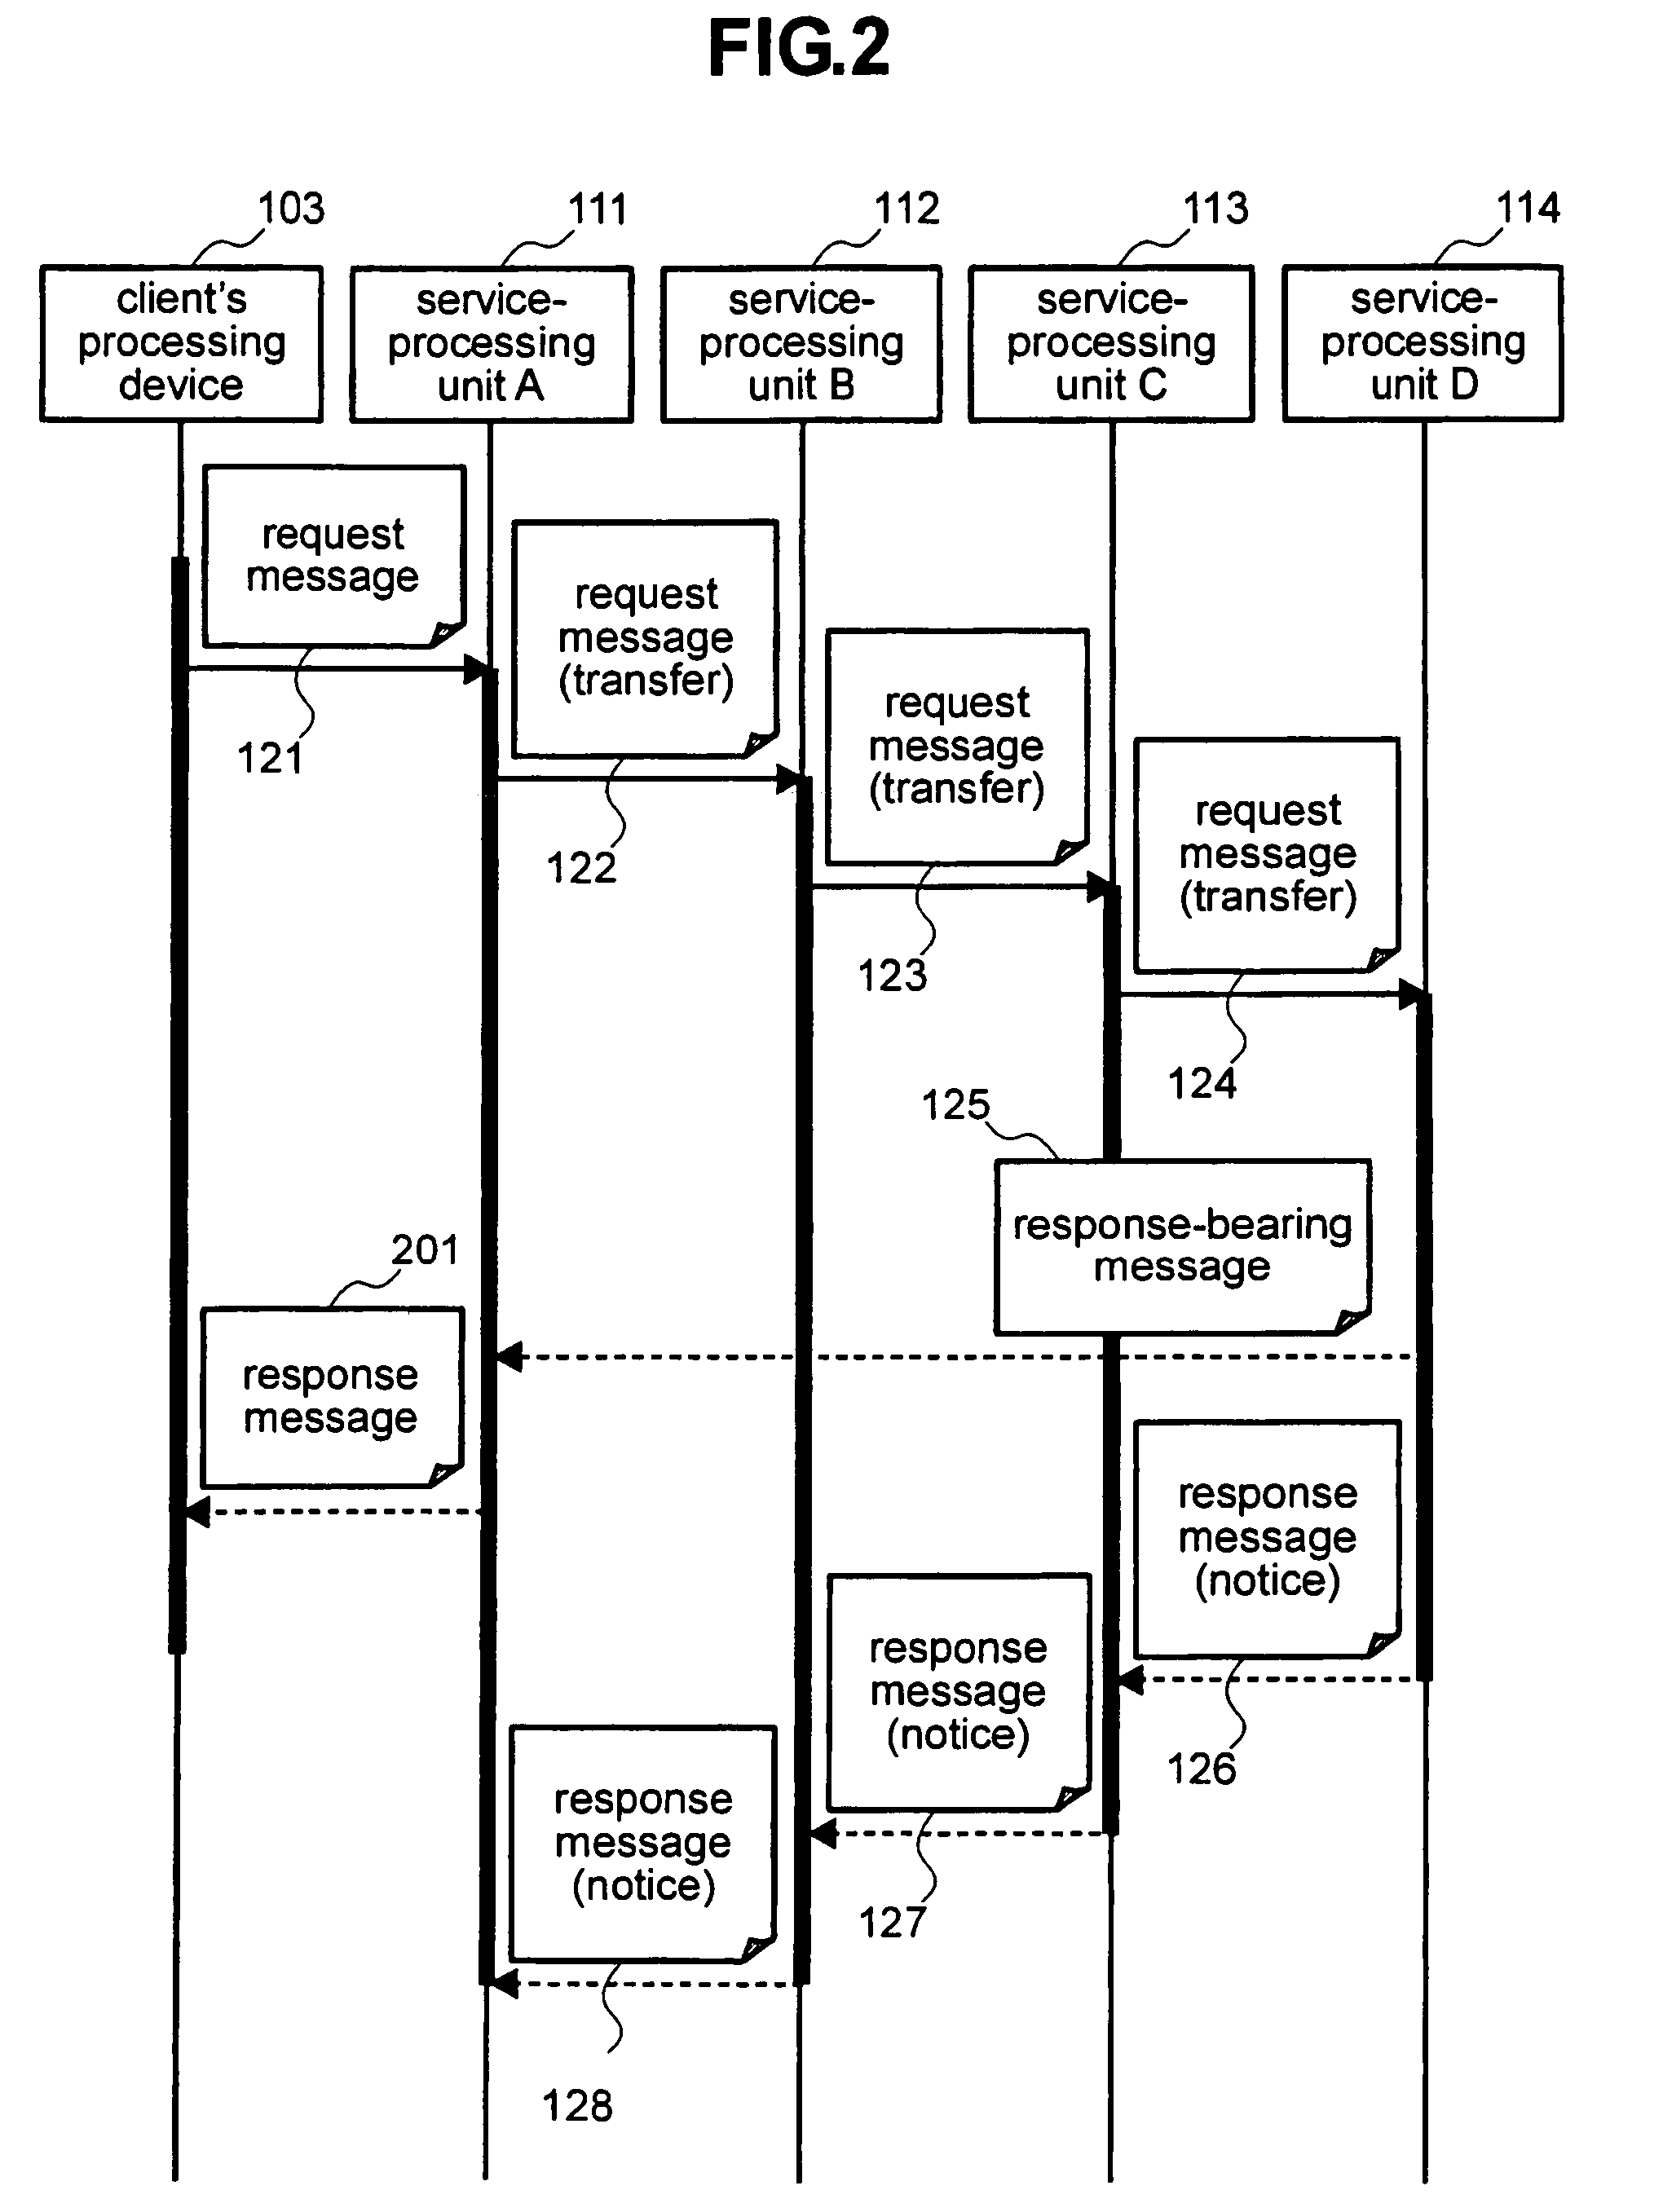 Method and system for managing programs for Web service system